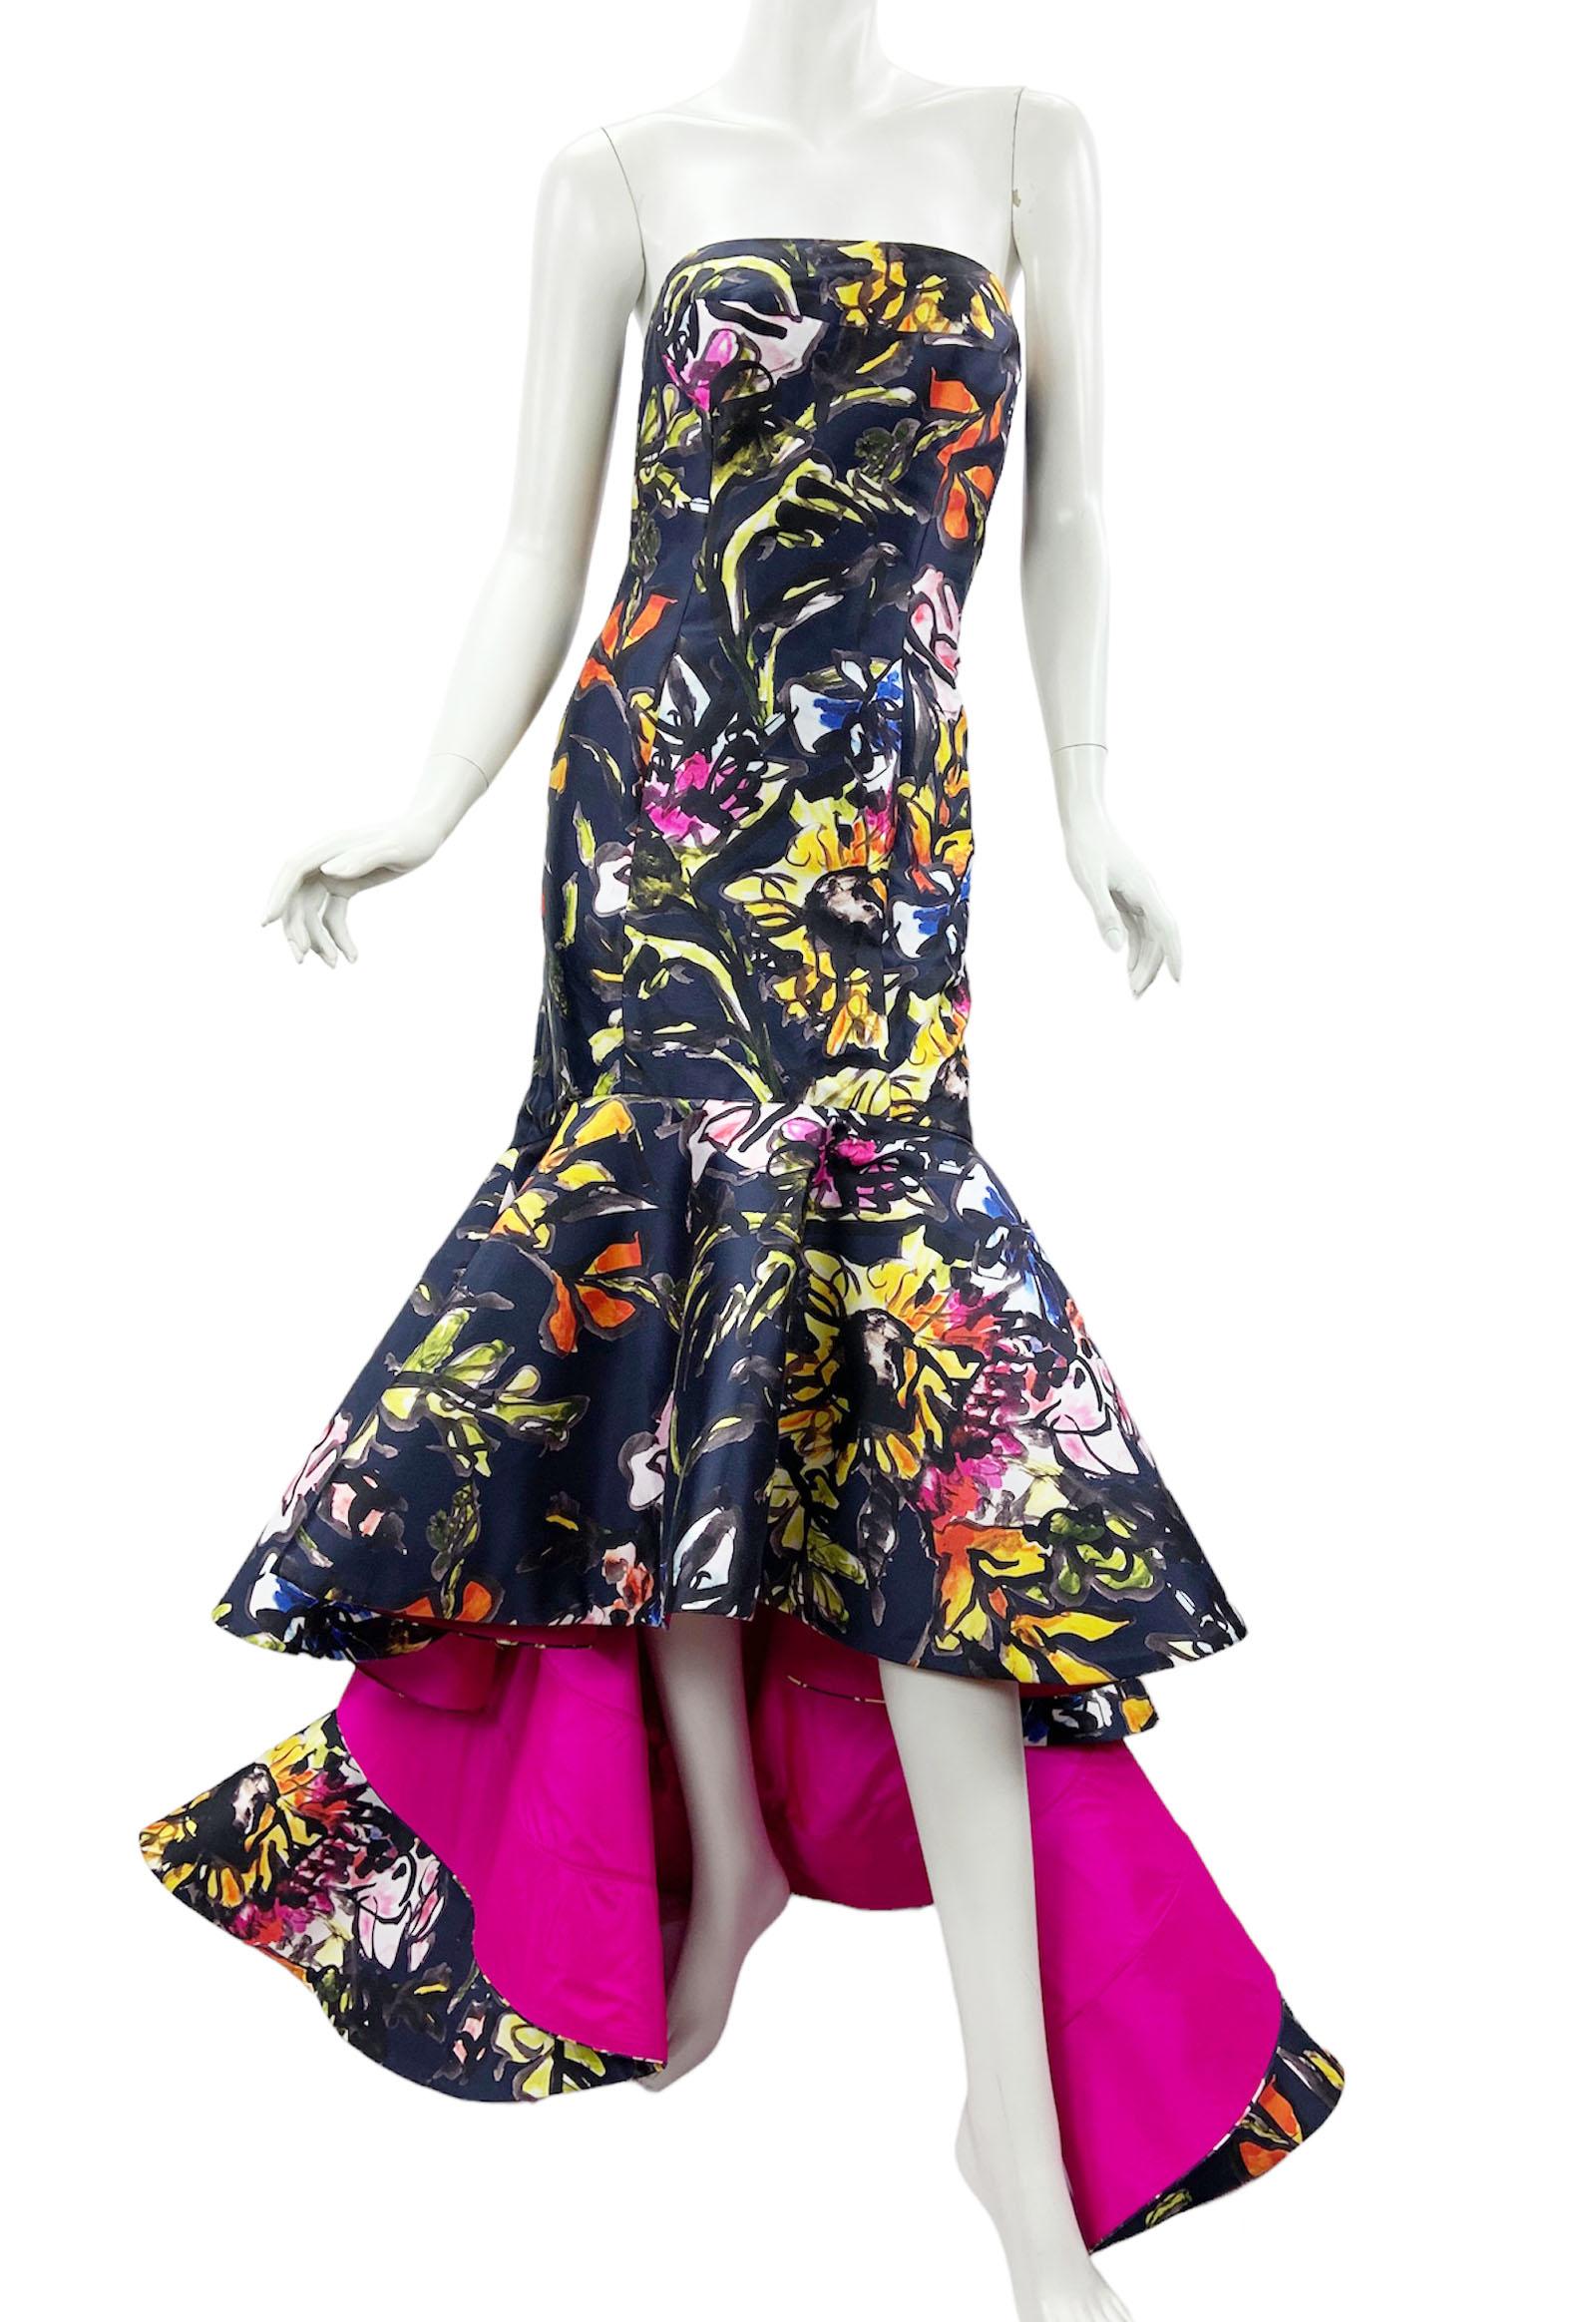 Oscar de la Renta Silk Floral Printed High-Low Dress Gown
P/F 2015 Collection
USA size - 6
Oscar de la Renta printed sateen mermaid gown with contrast reverse. Strapless neckline. Nips in at natural waist. Fitted skirt flares into flowing ruffles at